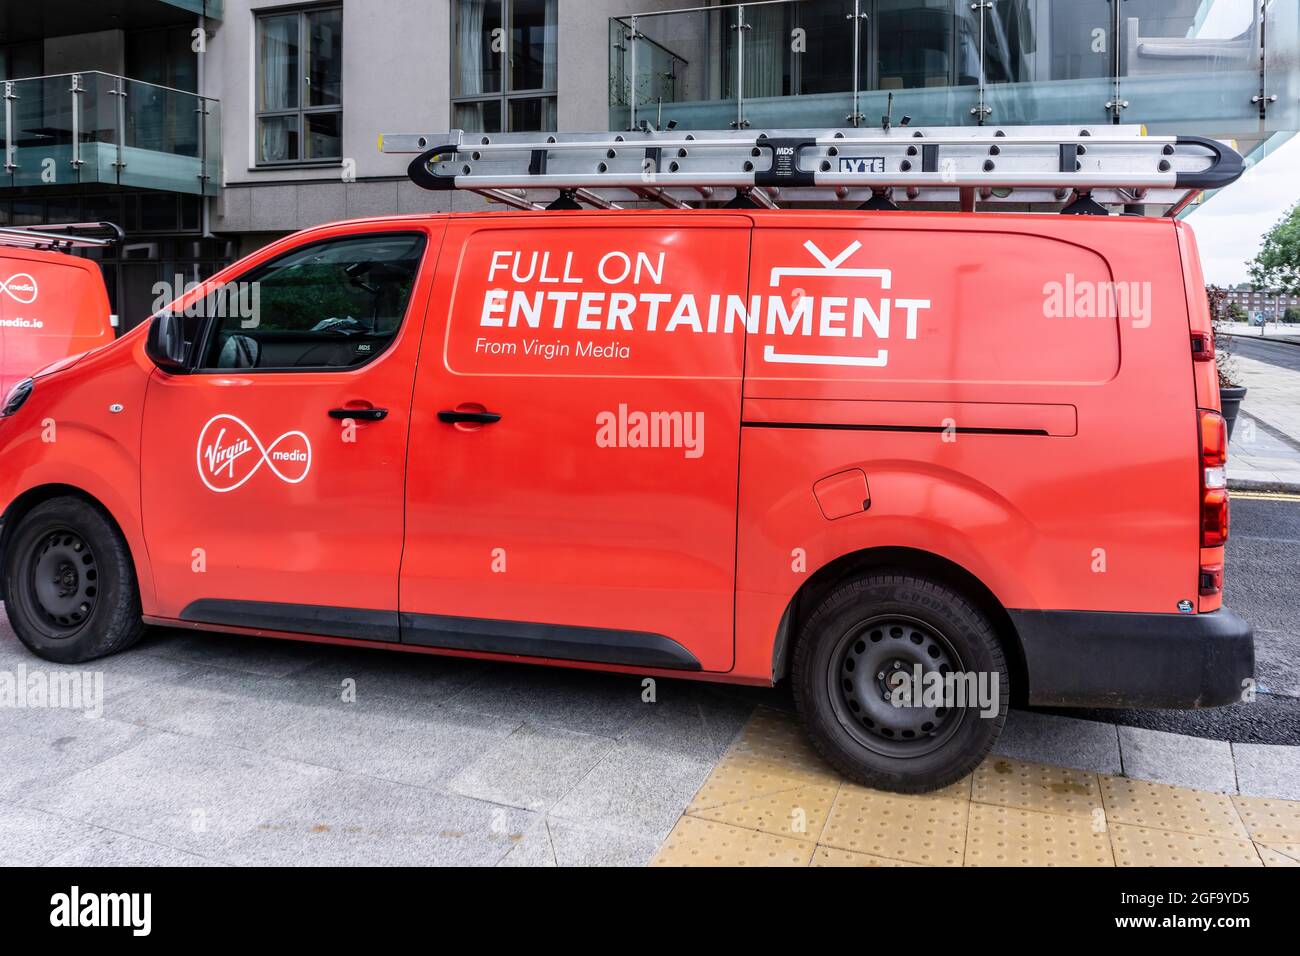 A Virgin Media Van in Dublin. Virgin media provides broadband, cable television and mobile phone services. It is part of the Liberty Global Group. Stock Photo